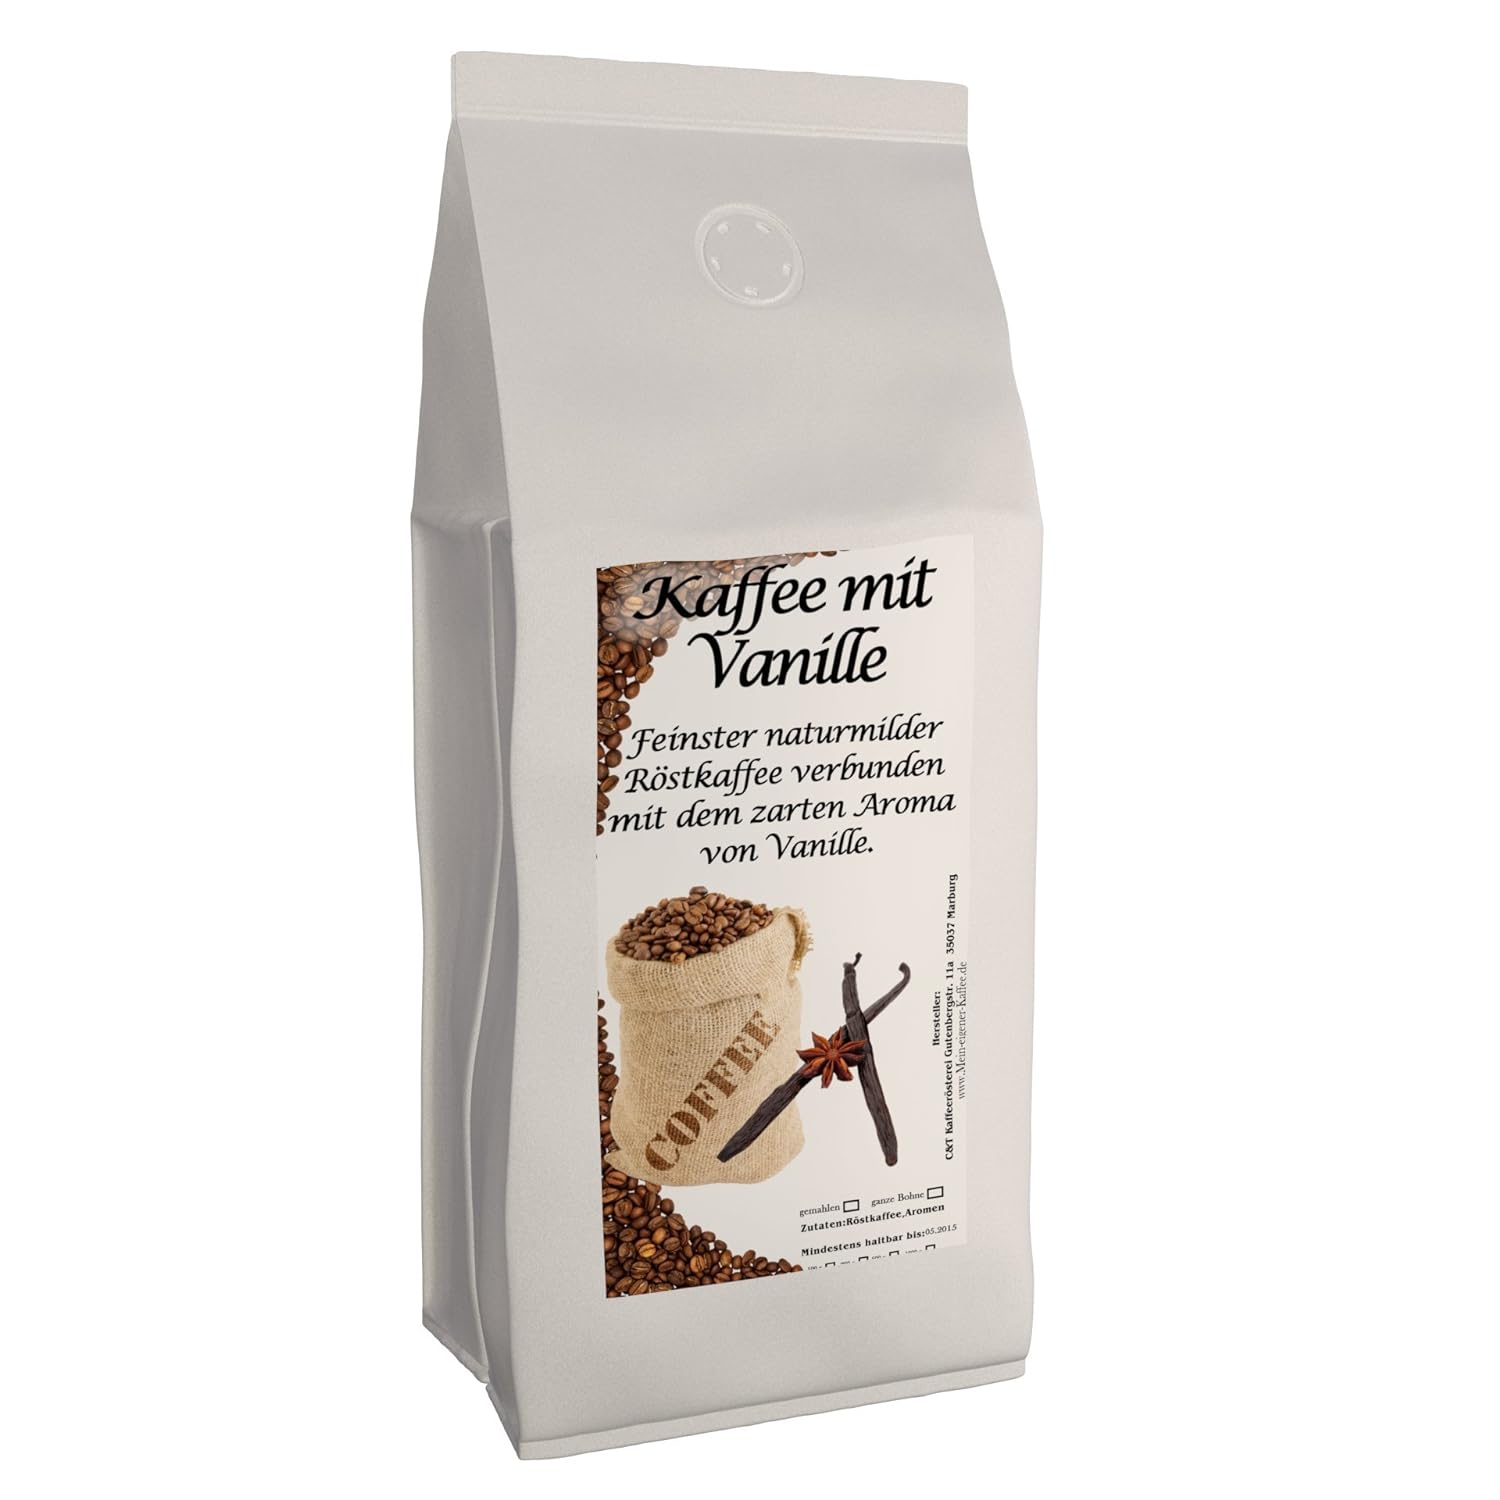 Aroma Coffee - Flavored Coffee Vanilla, 1000 g Whole Beans - Top Coffee - Gentle and Fresh Roasted in Own Roastery